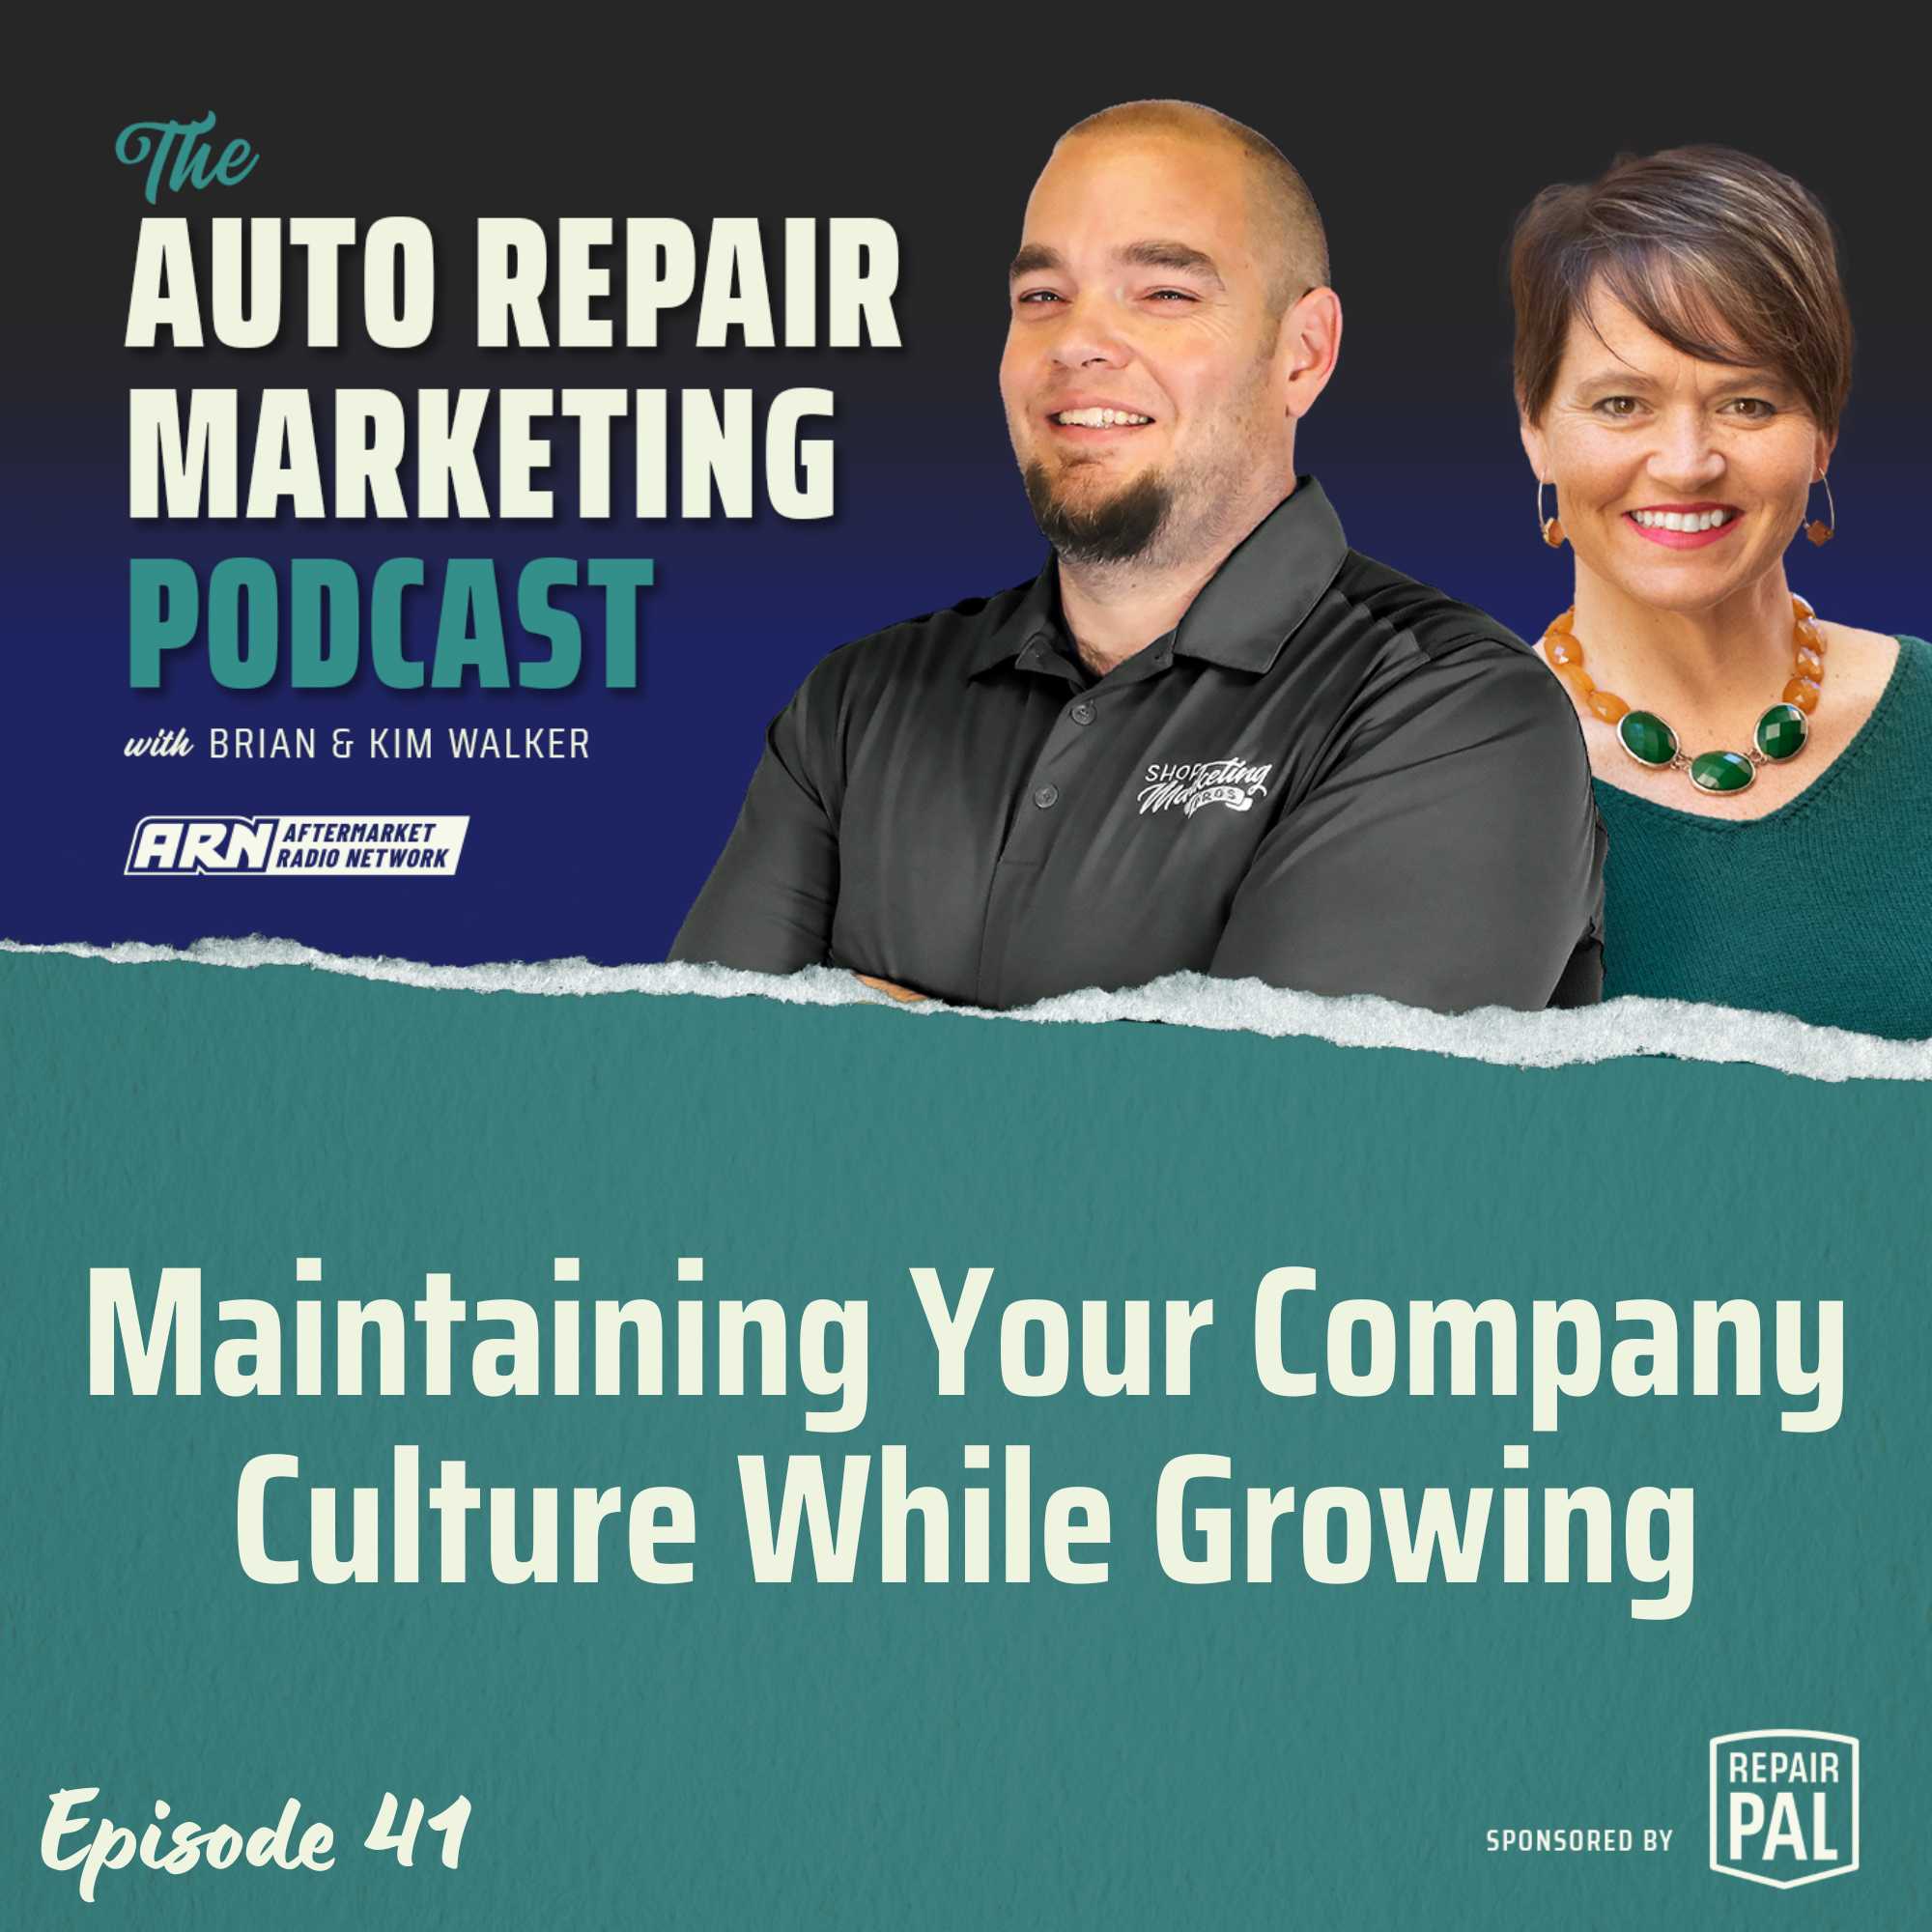 The Auto Repair Marketing Podcast Episode 41. Brian & Kim Walker talking about the topic "Maintaining Your Company Culture While Growing". Sponsored by Repair Pal.